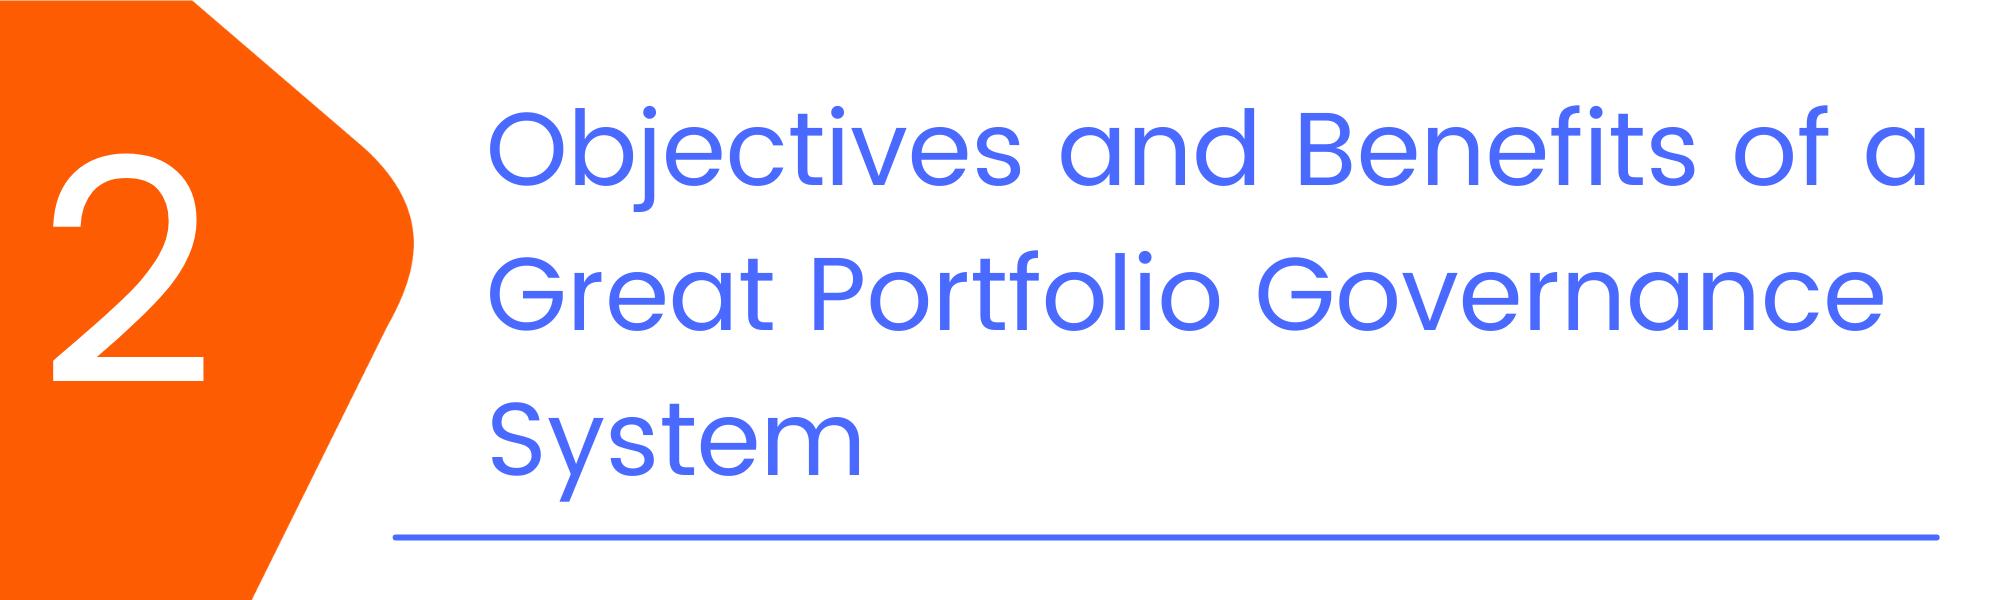 Objectives And Benefits Of A Great Portfolio Governance System